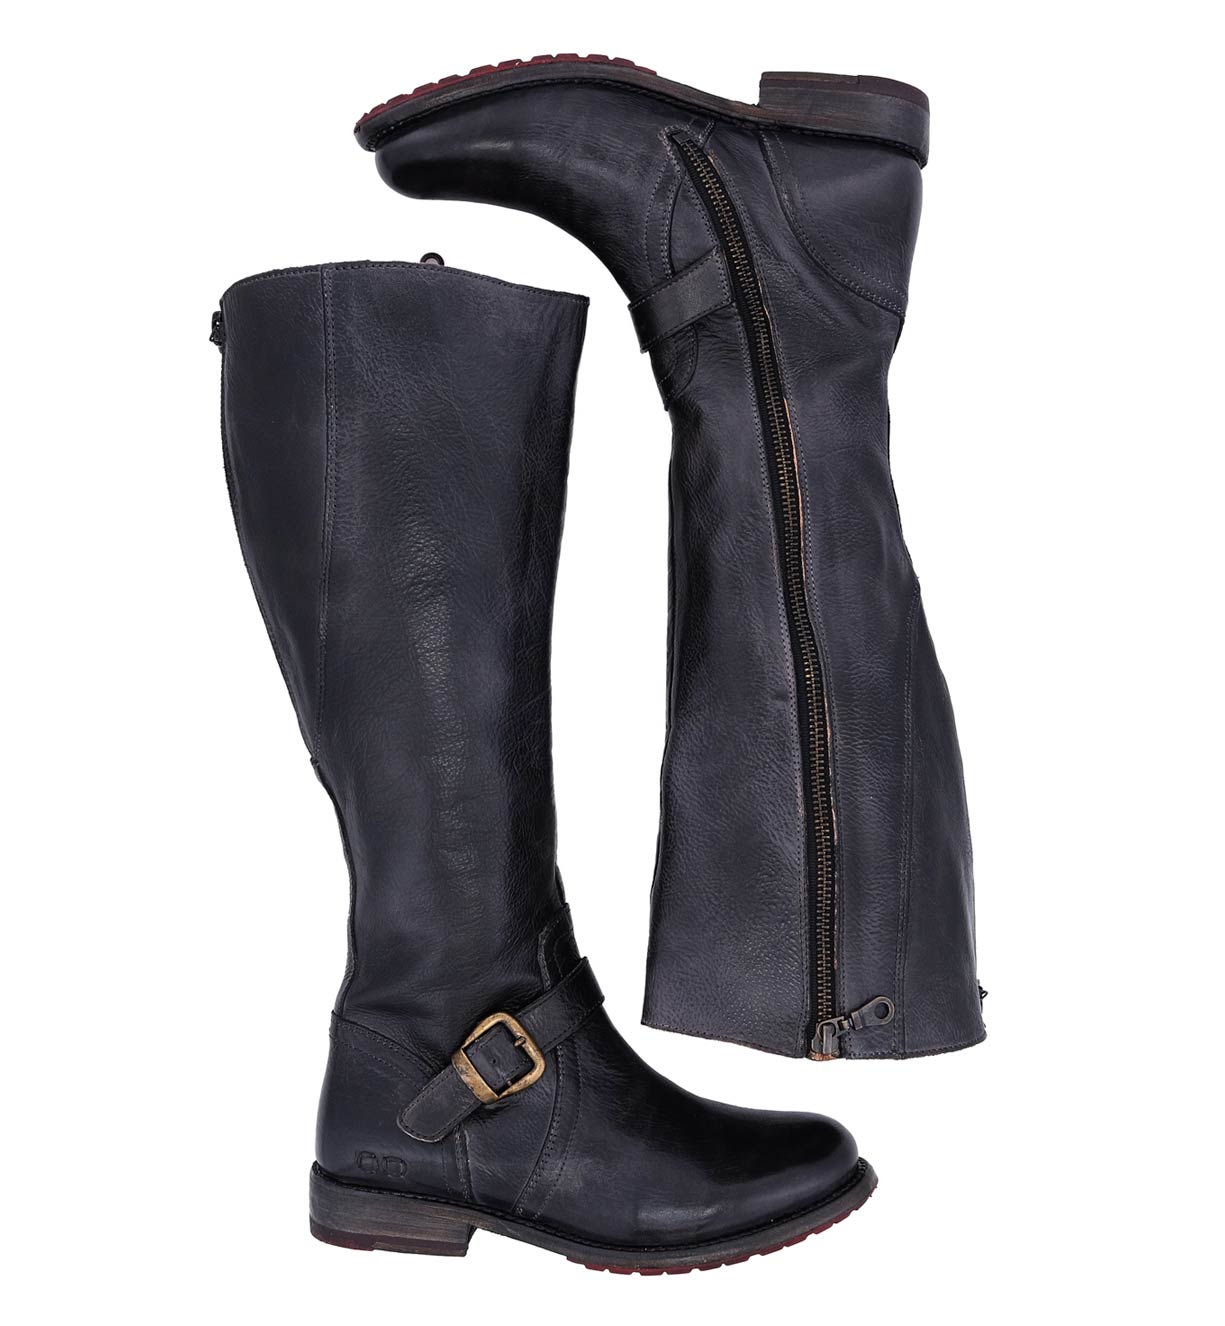 A pair of Glaye Wide Calf black leather boots with buckles and zippers from Bed Stu.